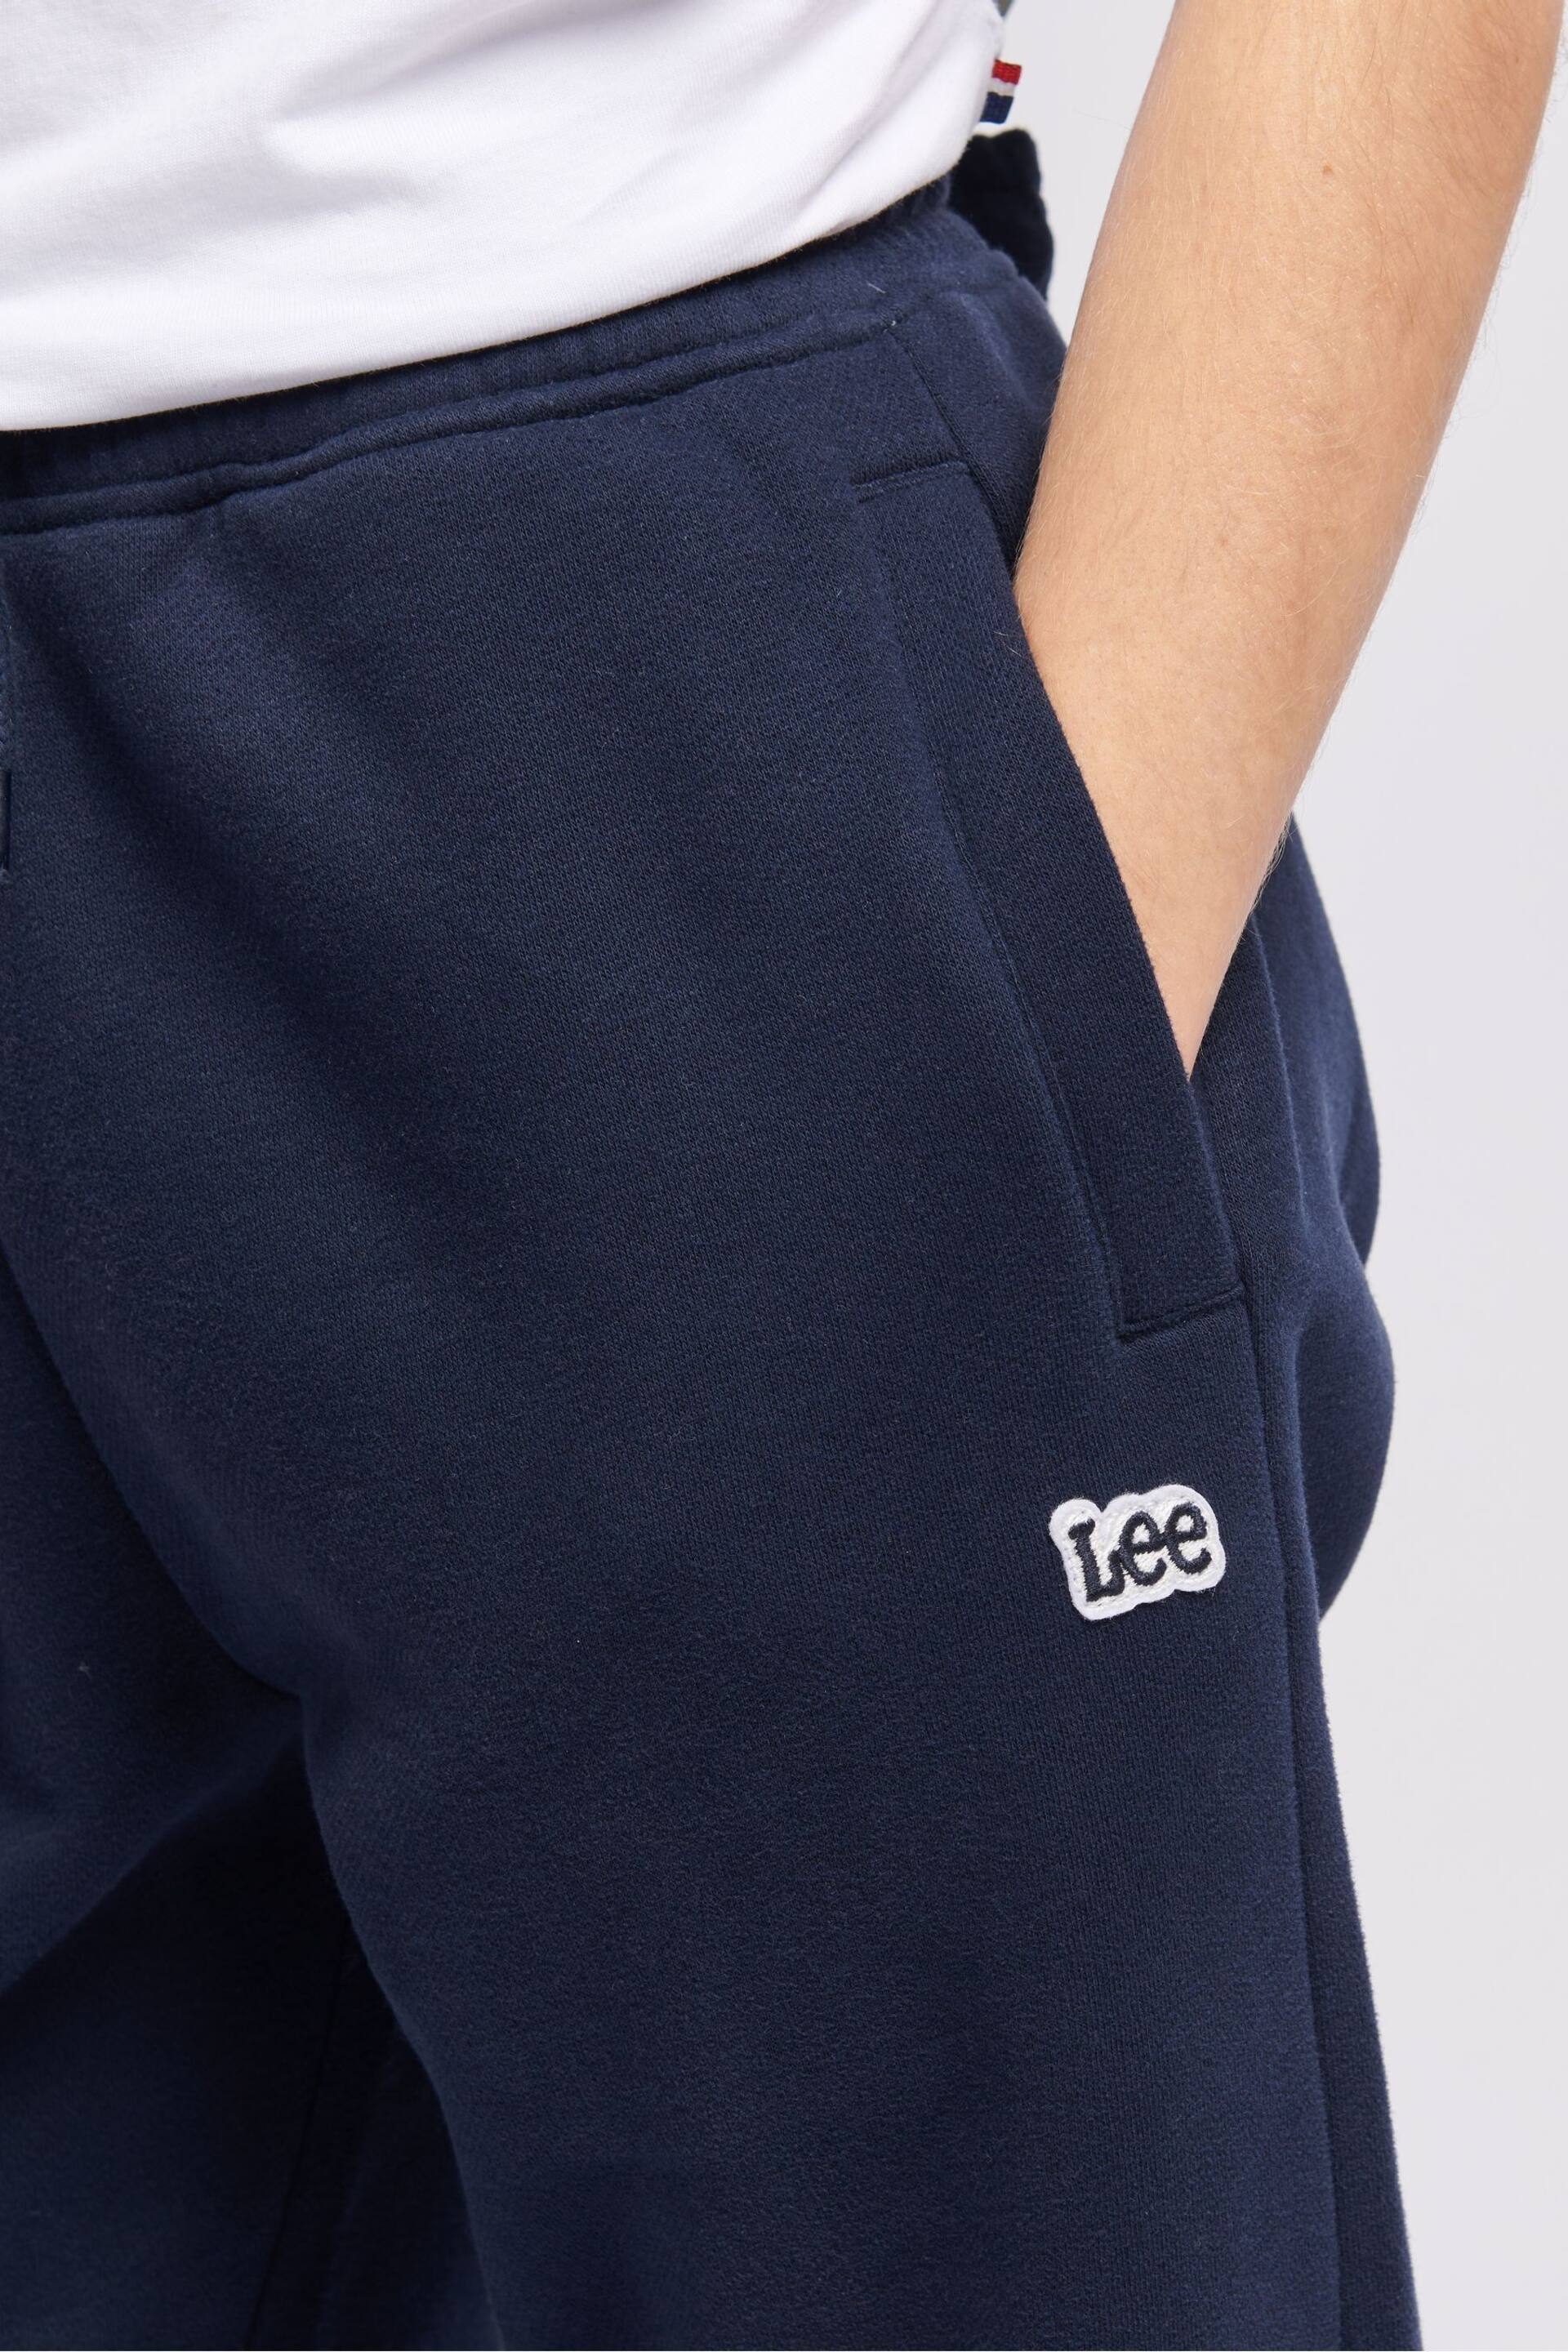 Lee Boys Blue Badge Joggers - Image 5 of 5